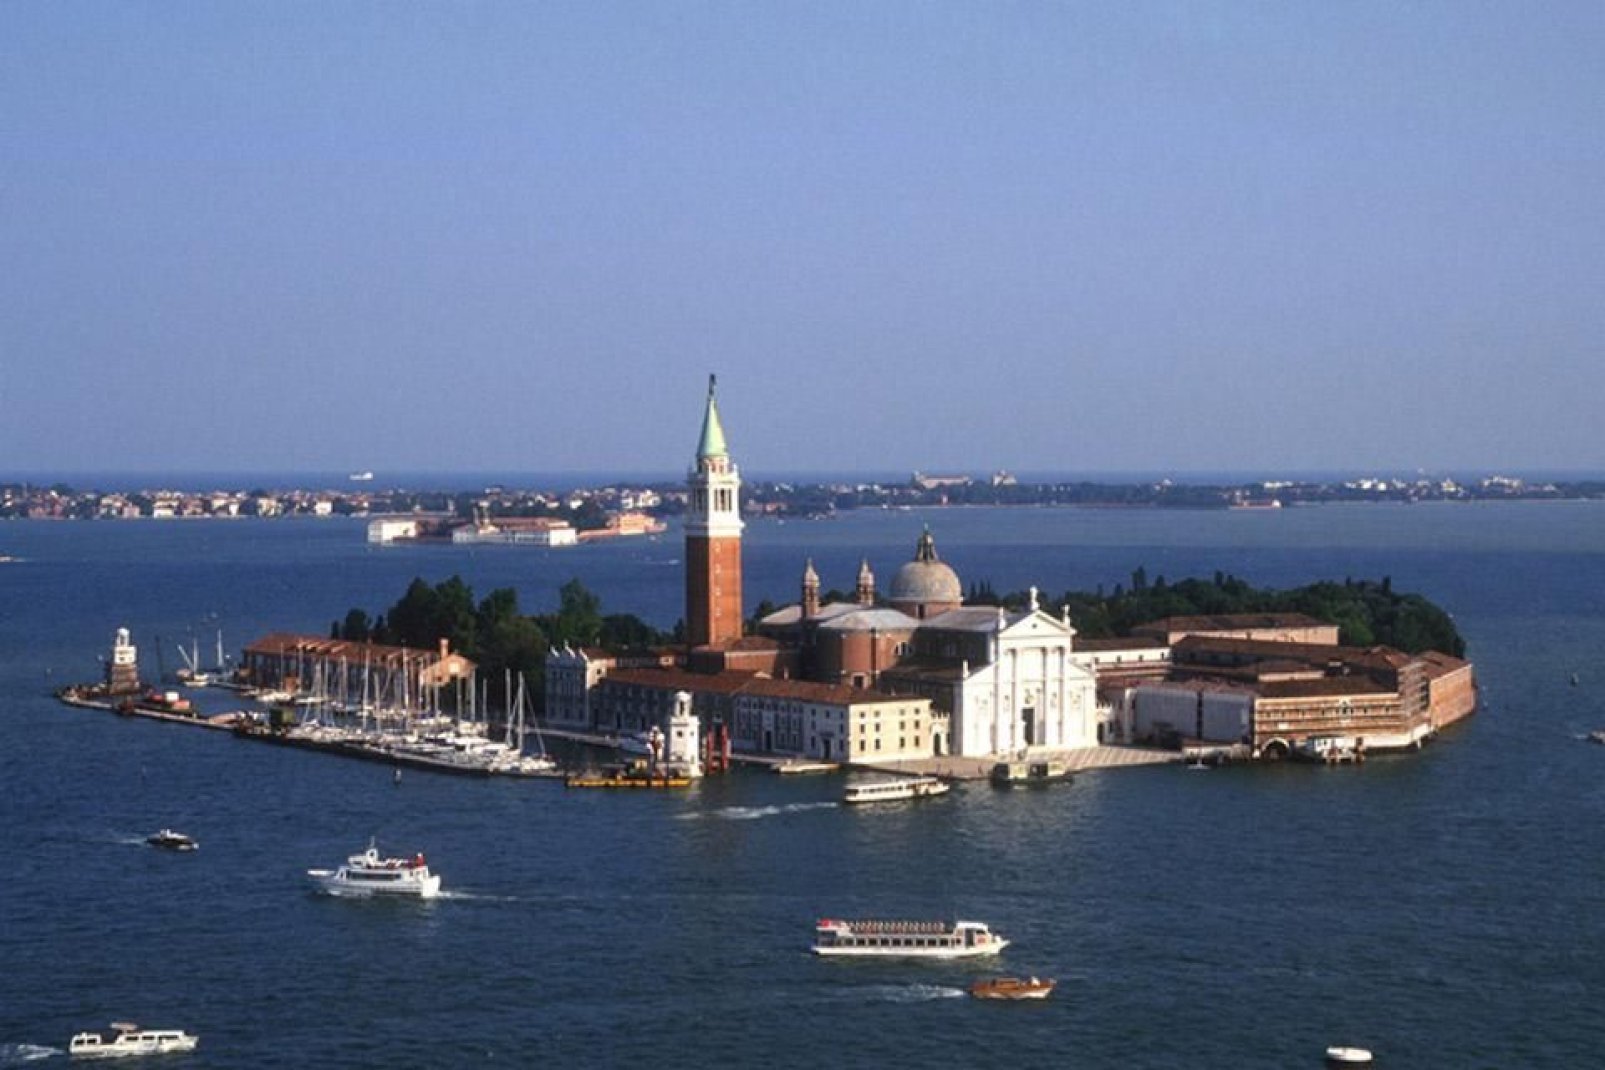 San Giorgio Maggiore island is situated opposite St. Mark's Square and is home to the basilica of the same name